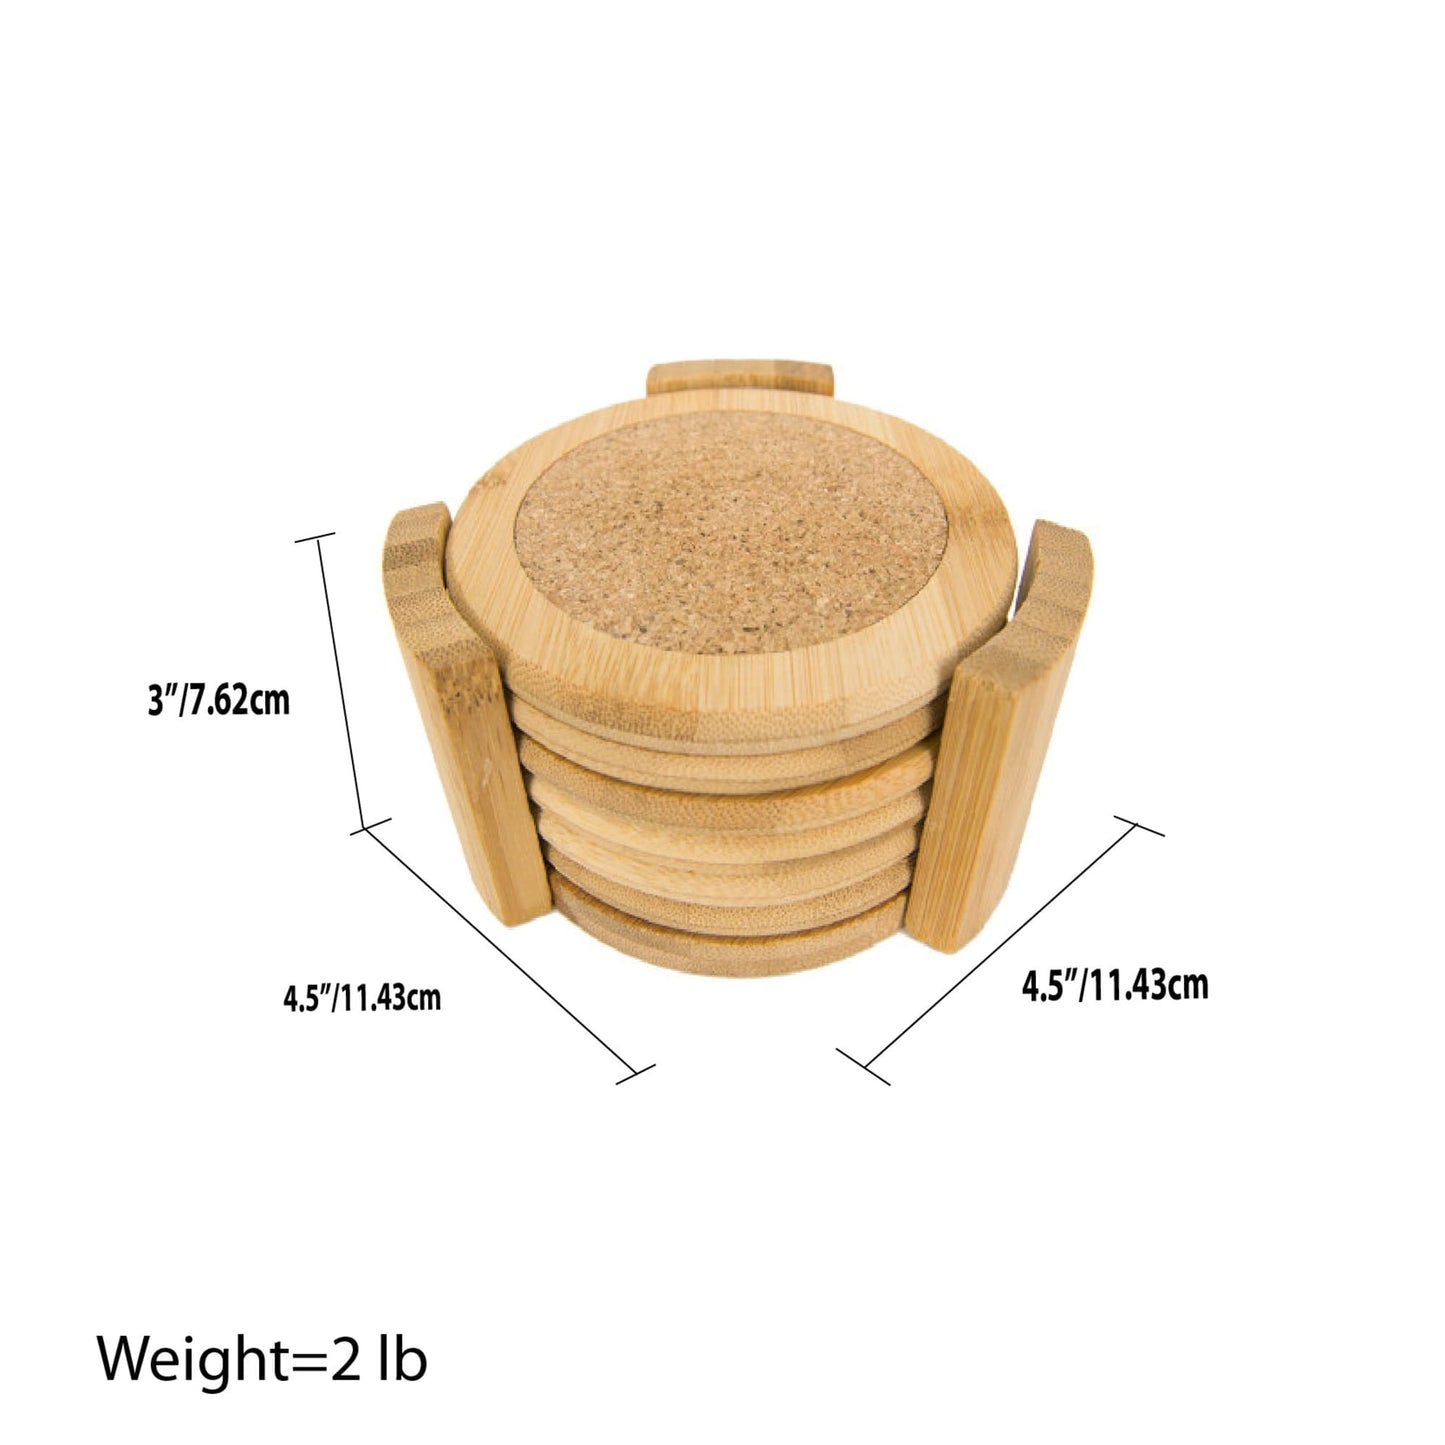 4.5" Bamboo Coaster Set, (Pack of 6) with Holder, Natural